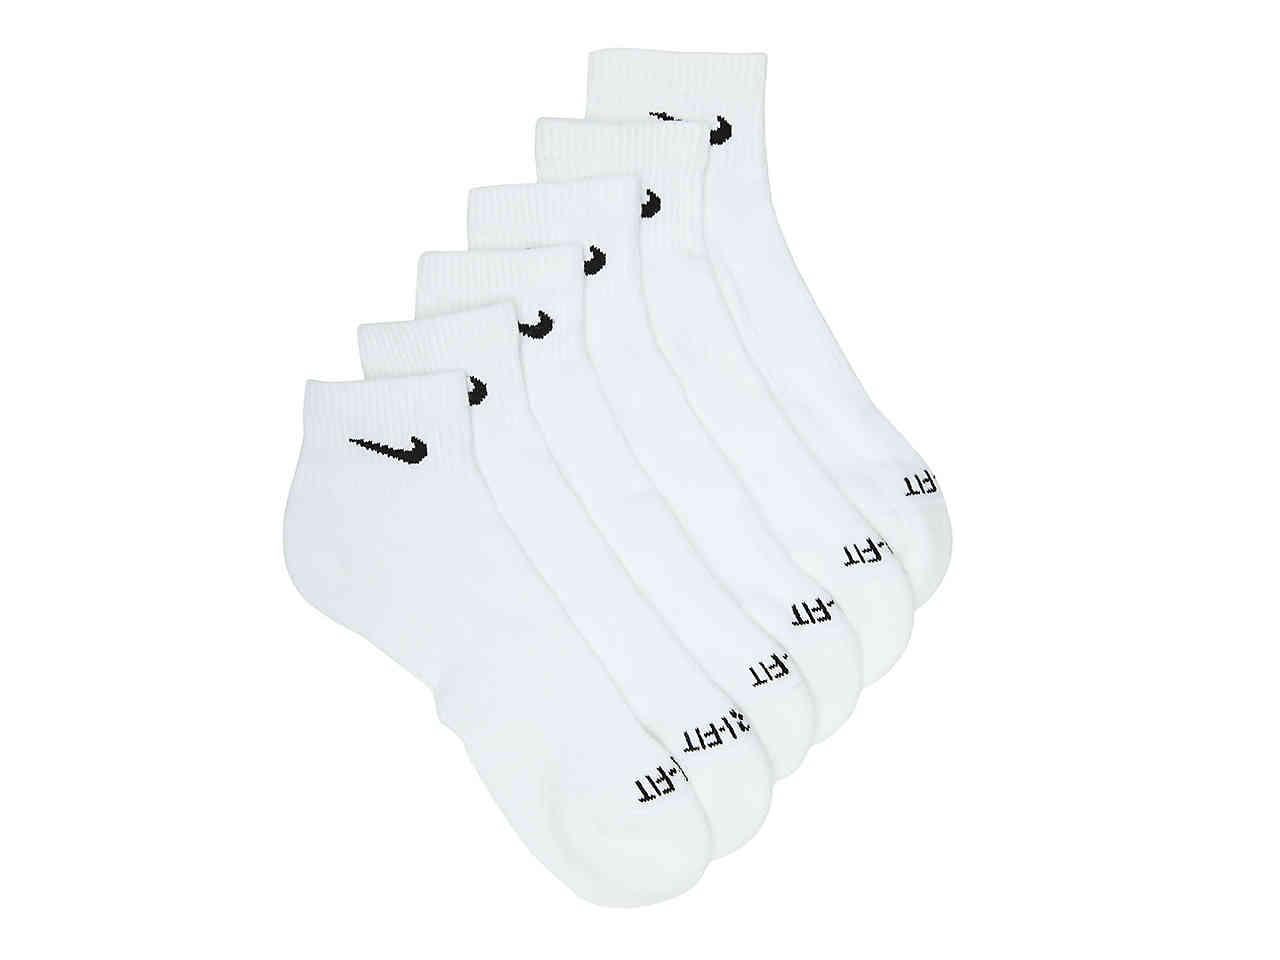 Nike Performance Cotton Cushioned Ankle Socks in White for Men - Lyst